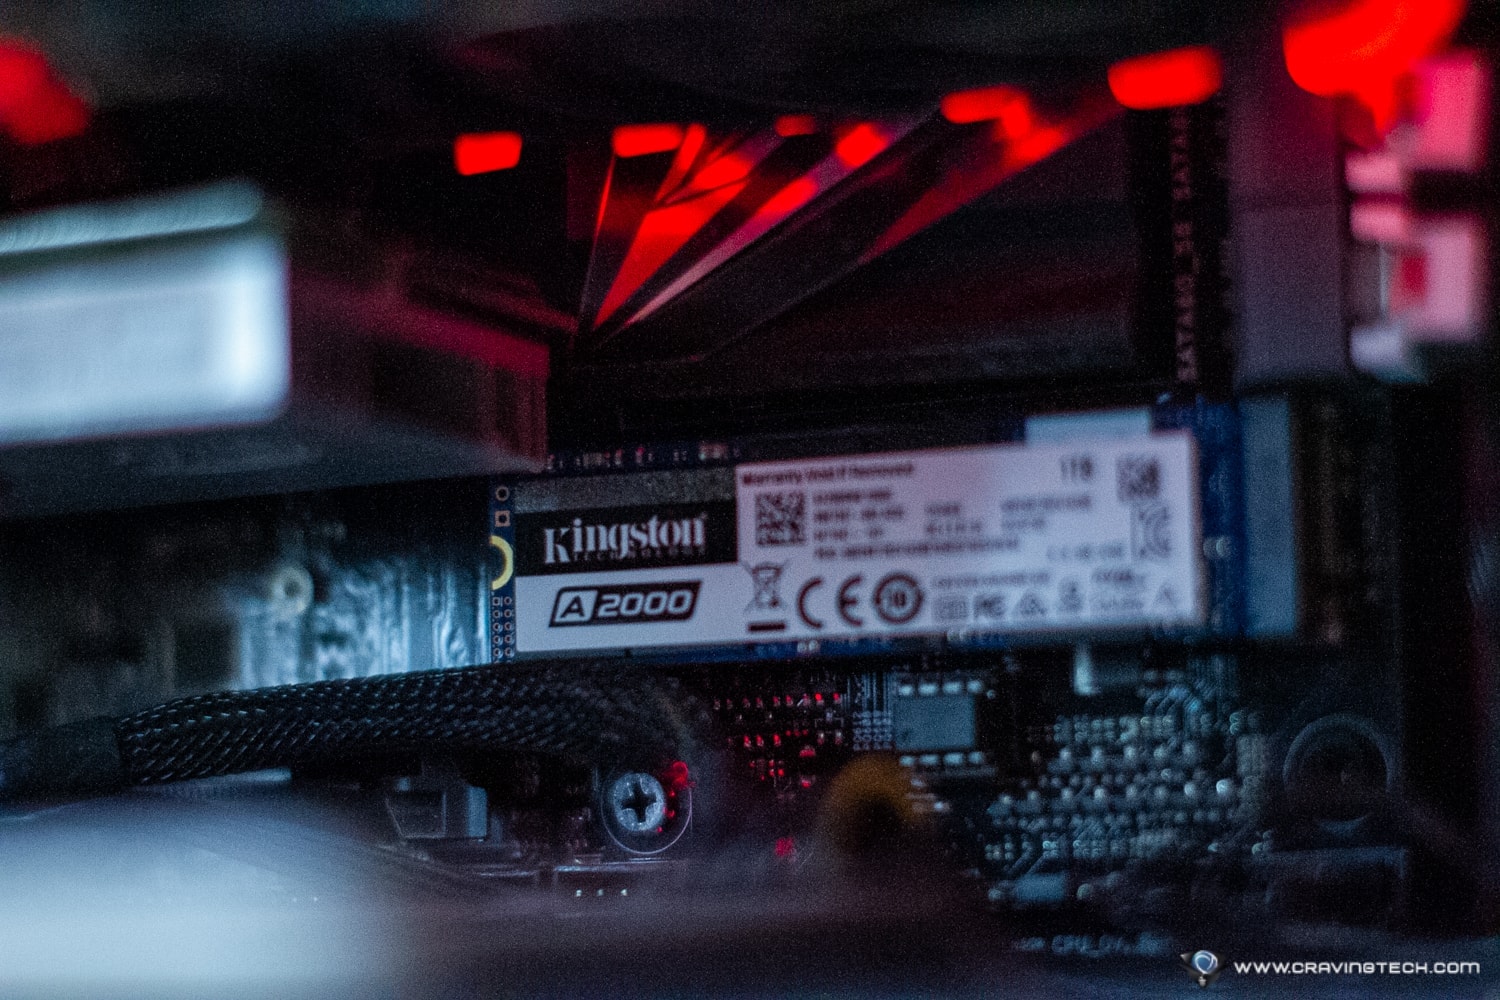 Affordable NVMe SSD with impressive writing speed – Kingston A2000 NVMe PCIe SSD Review